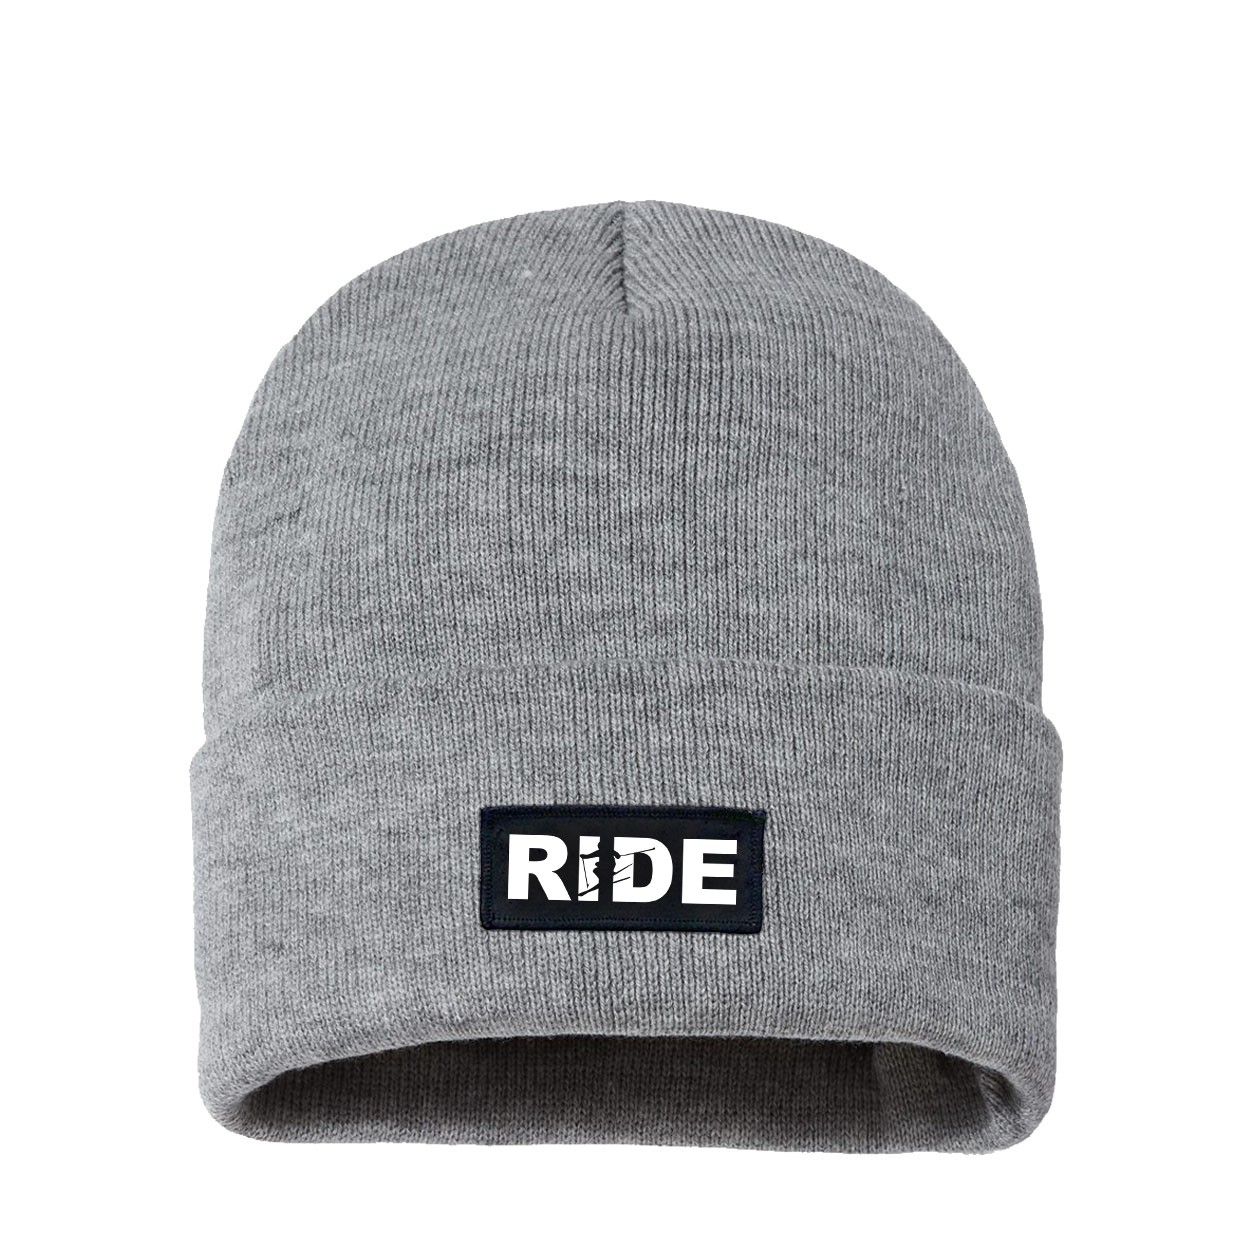 Ride Ski Logo Night Out Woven Patch Night Out Sherpa Lined Cuffed Beanie Heather Gray (White Logo)